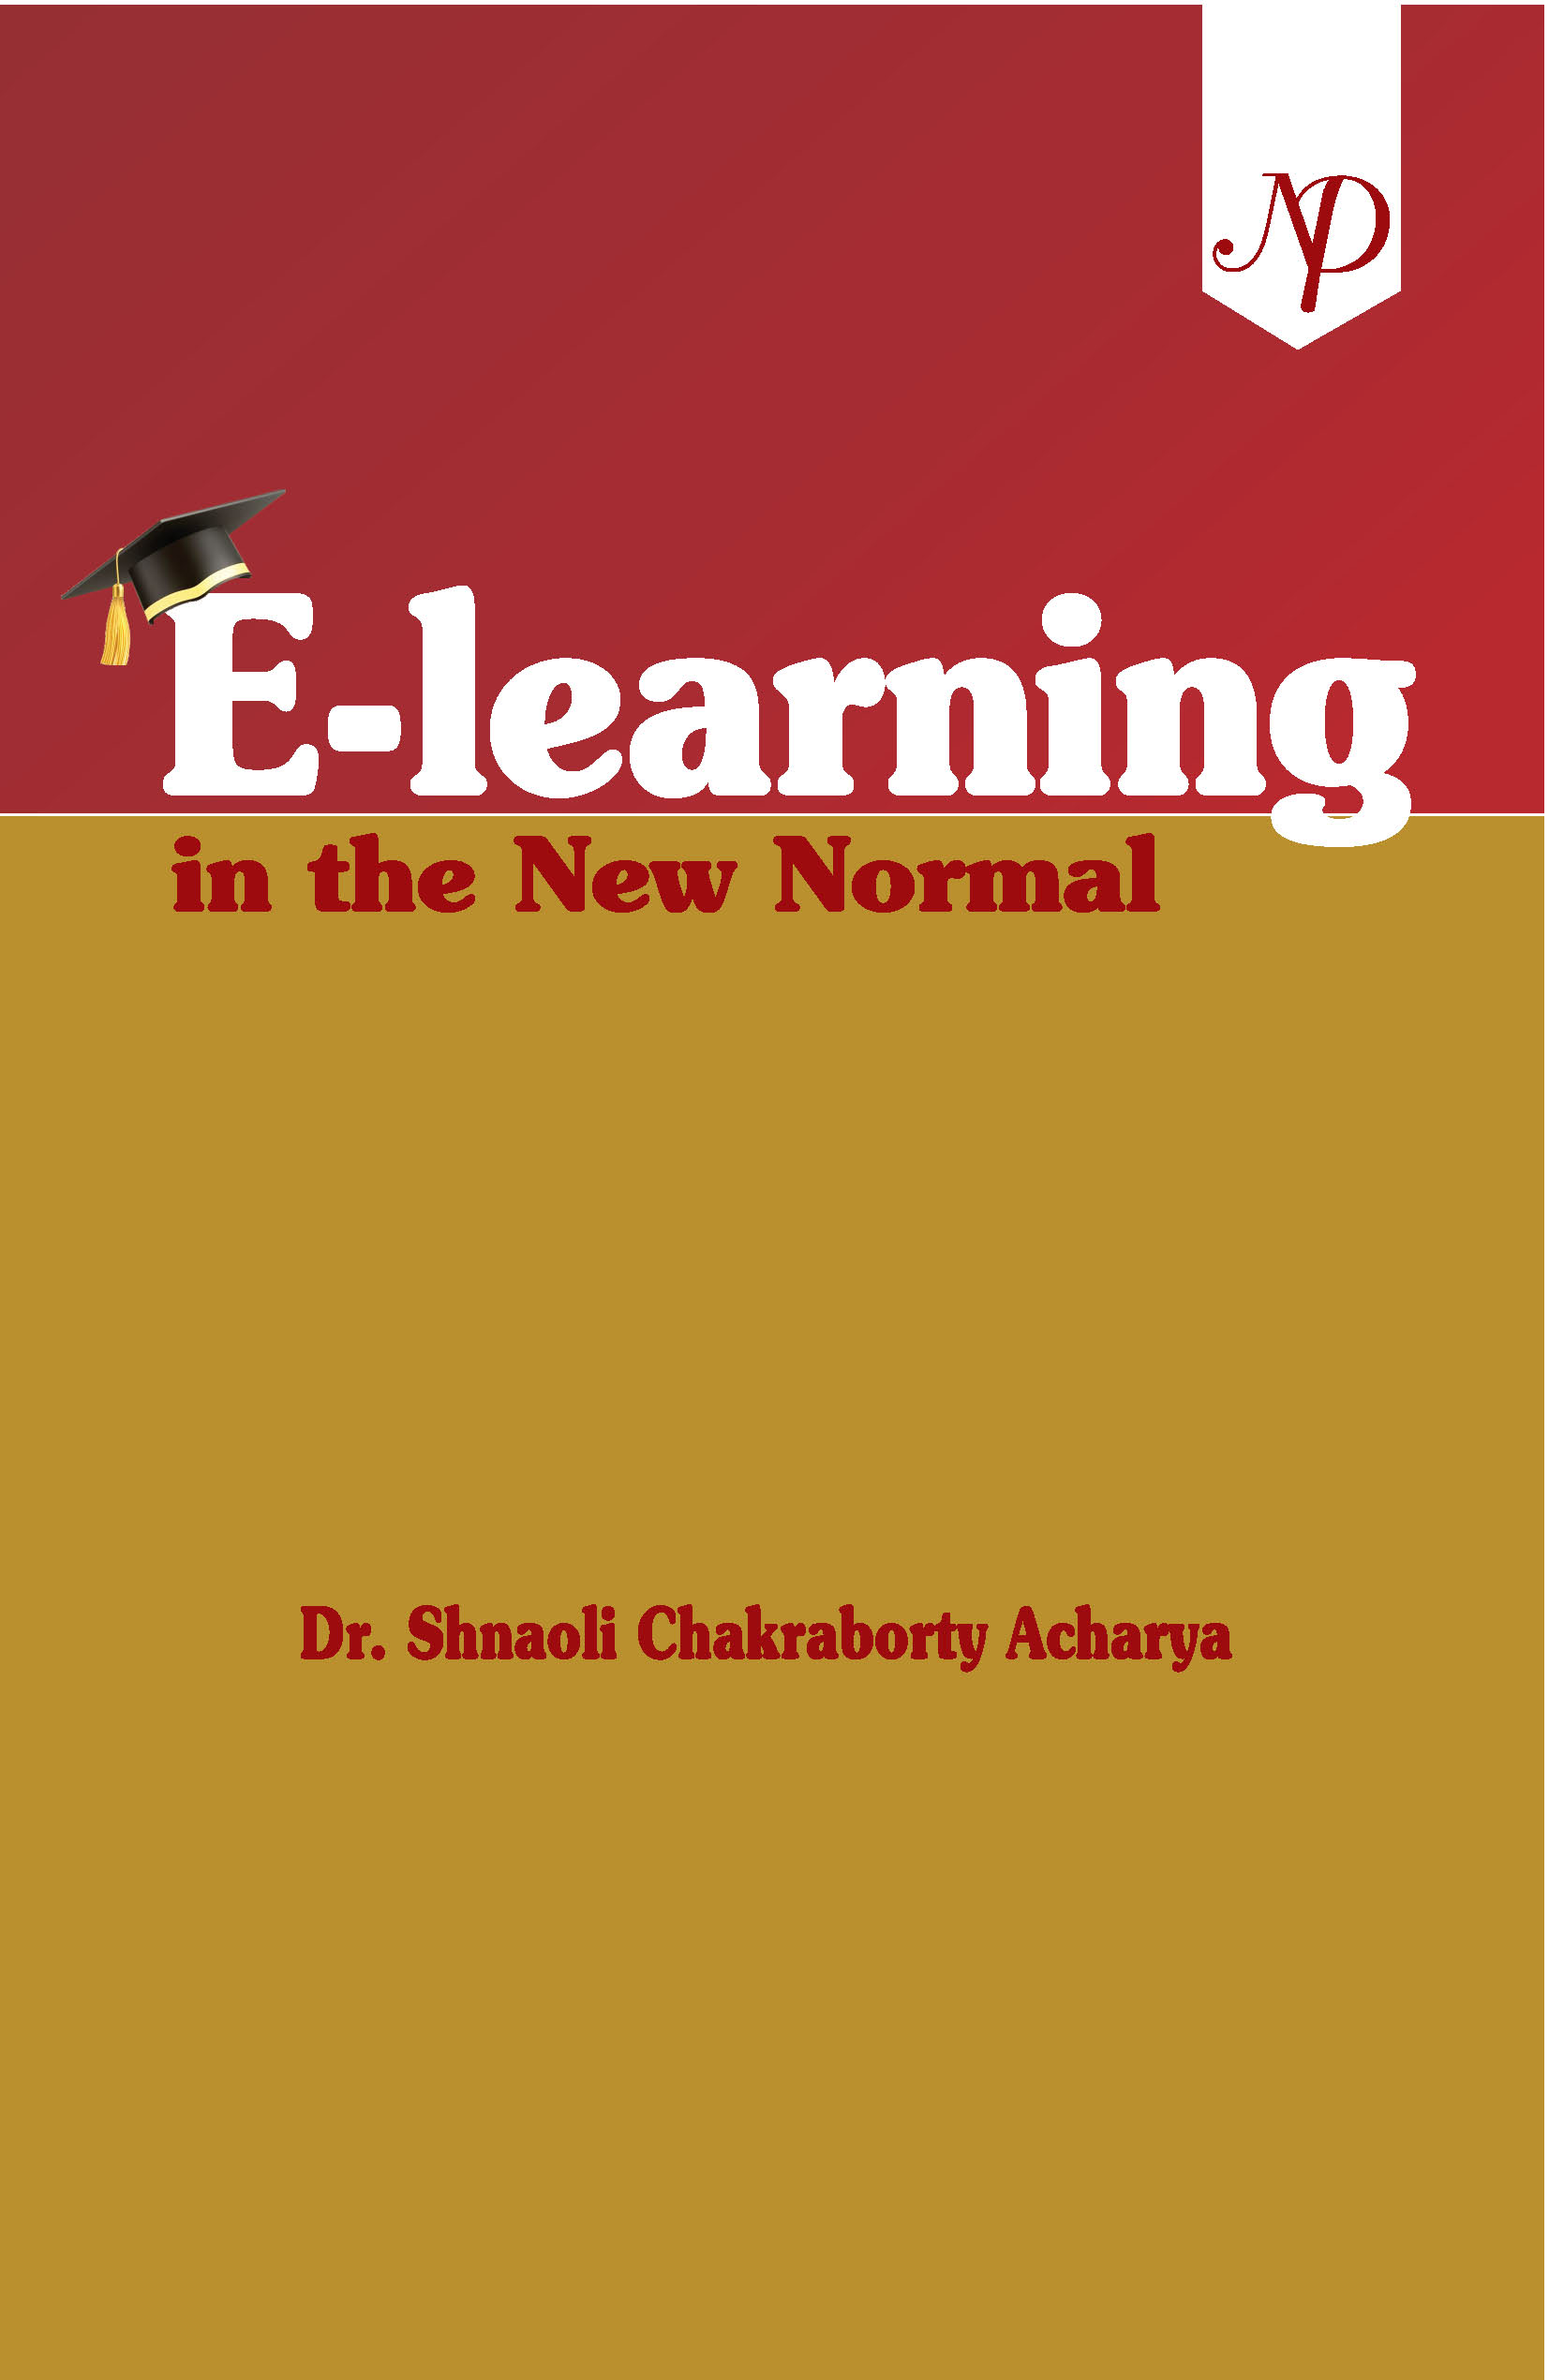 E-Learning in the New Normal Cover.jpg